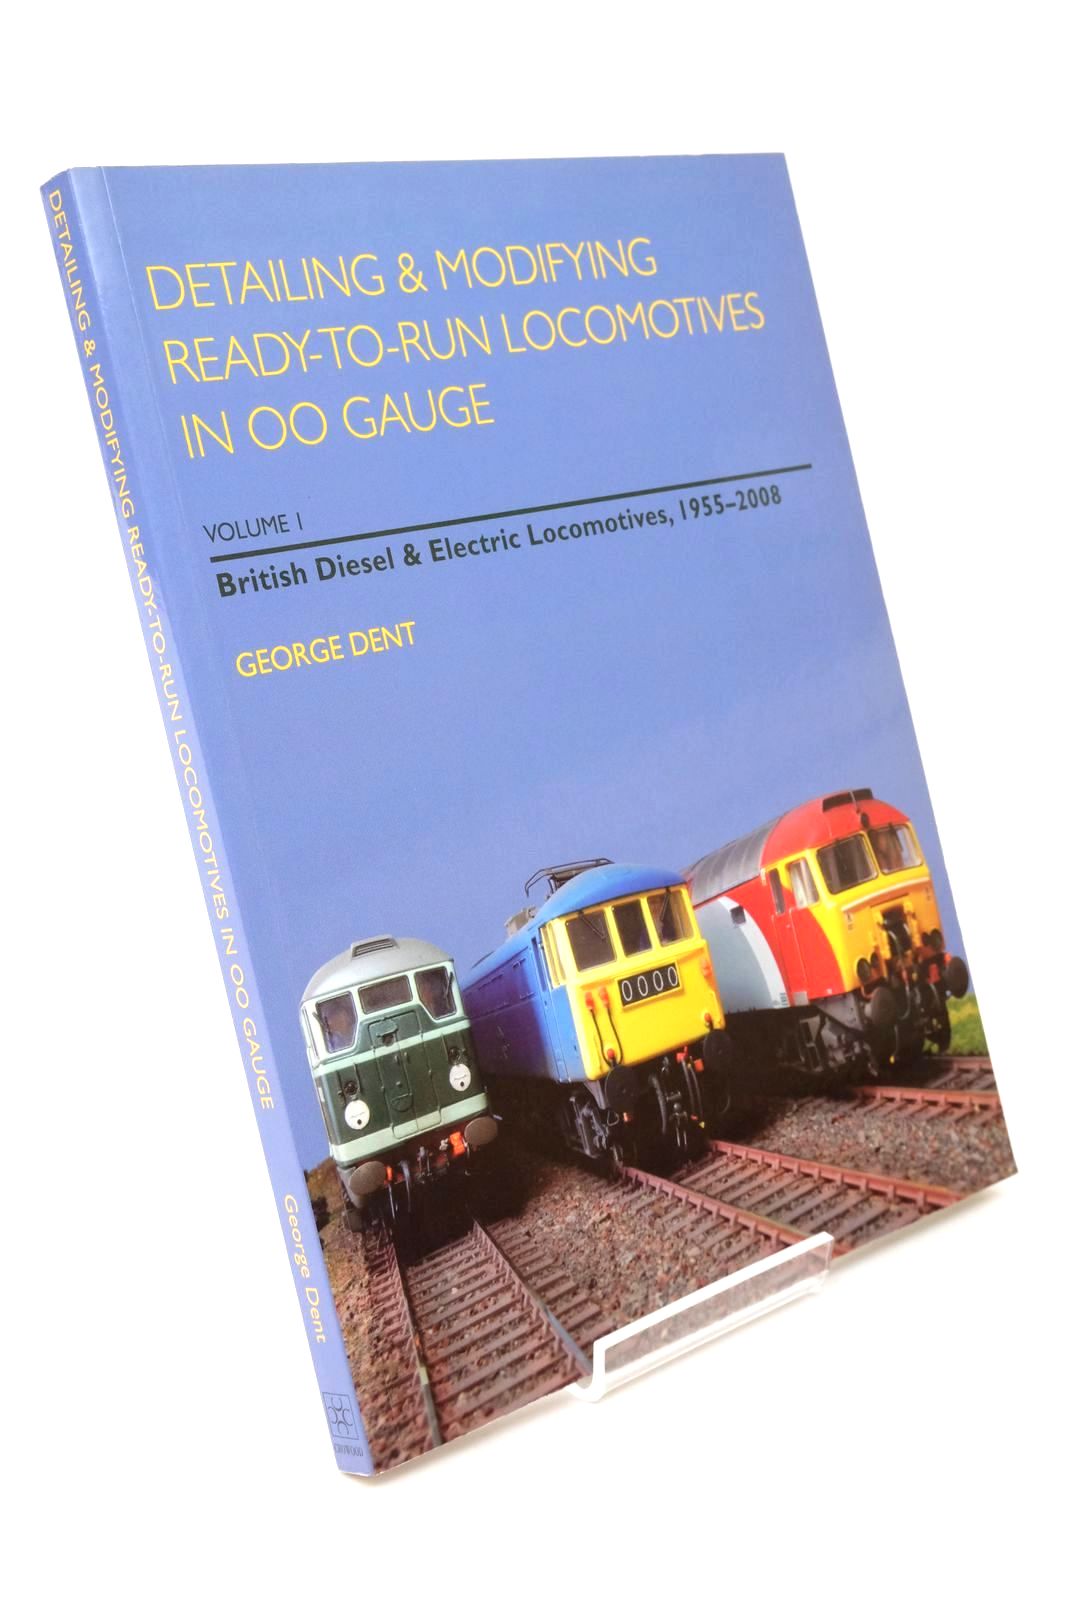 Photo of DETAILING AND MODIFYING READY-TO-RUN LOCOMOTIVES IN OO GAUGE VOLUME 1- Stock Number: 1322522